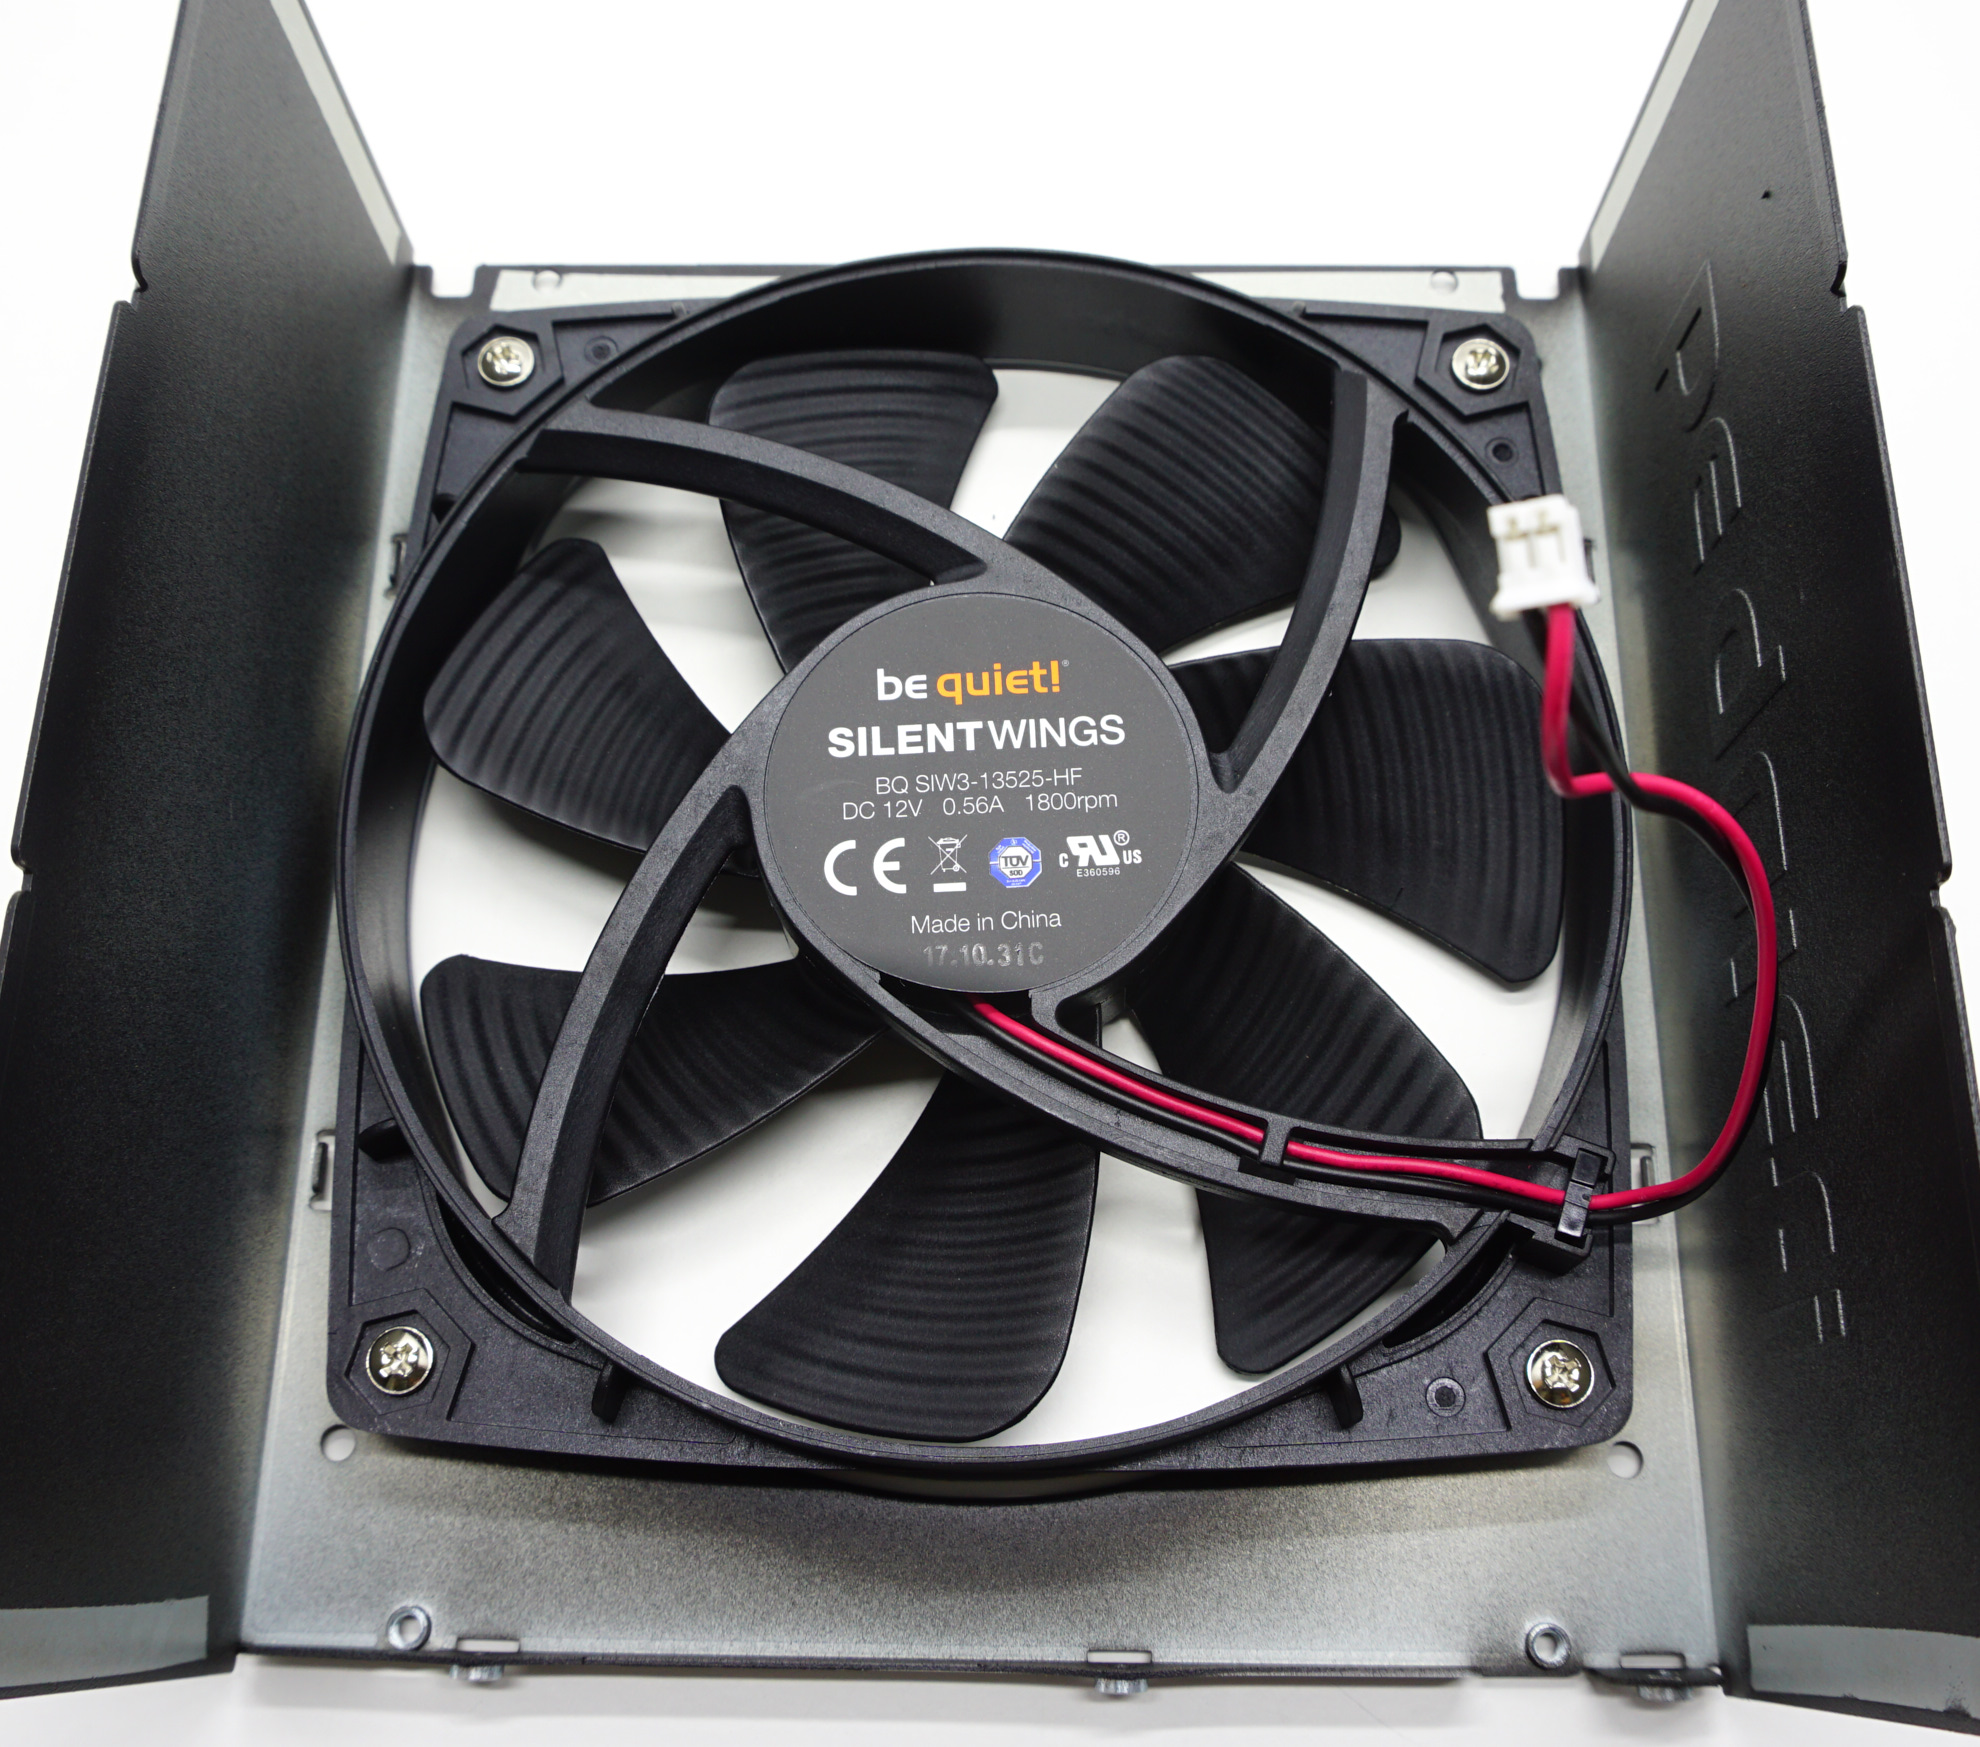 be quiet! Straight Power 11 750w Power Supply Review